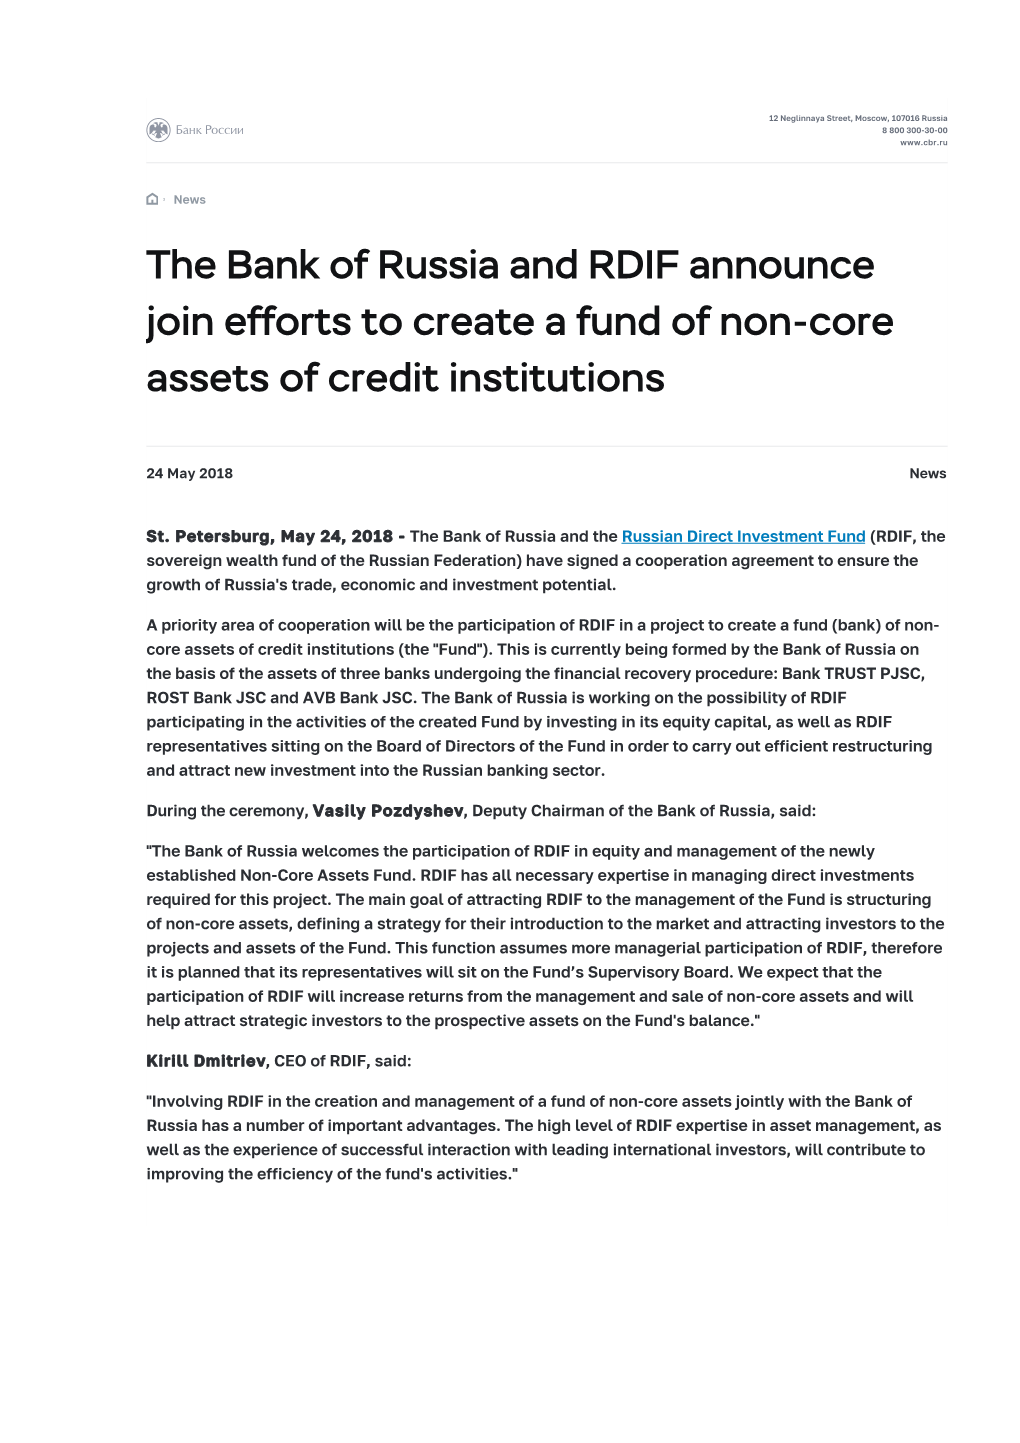 The Bank of Russia and RDIF Announce Join Efforts to Create a Fund of Non-Core Assets of Credit Institutions